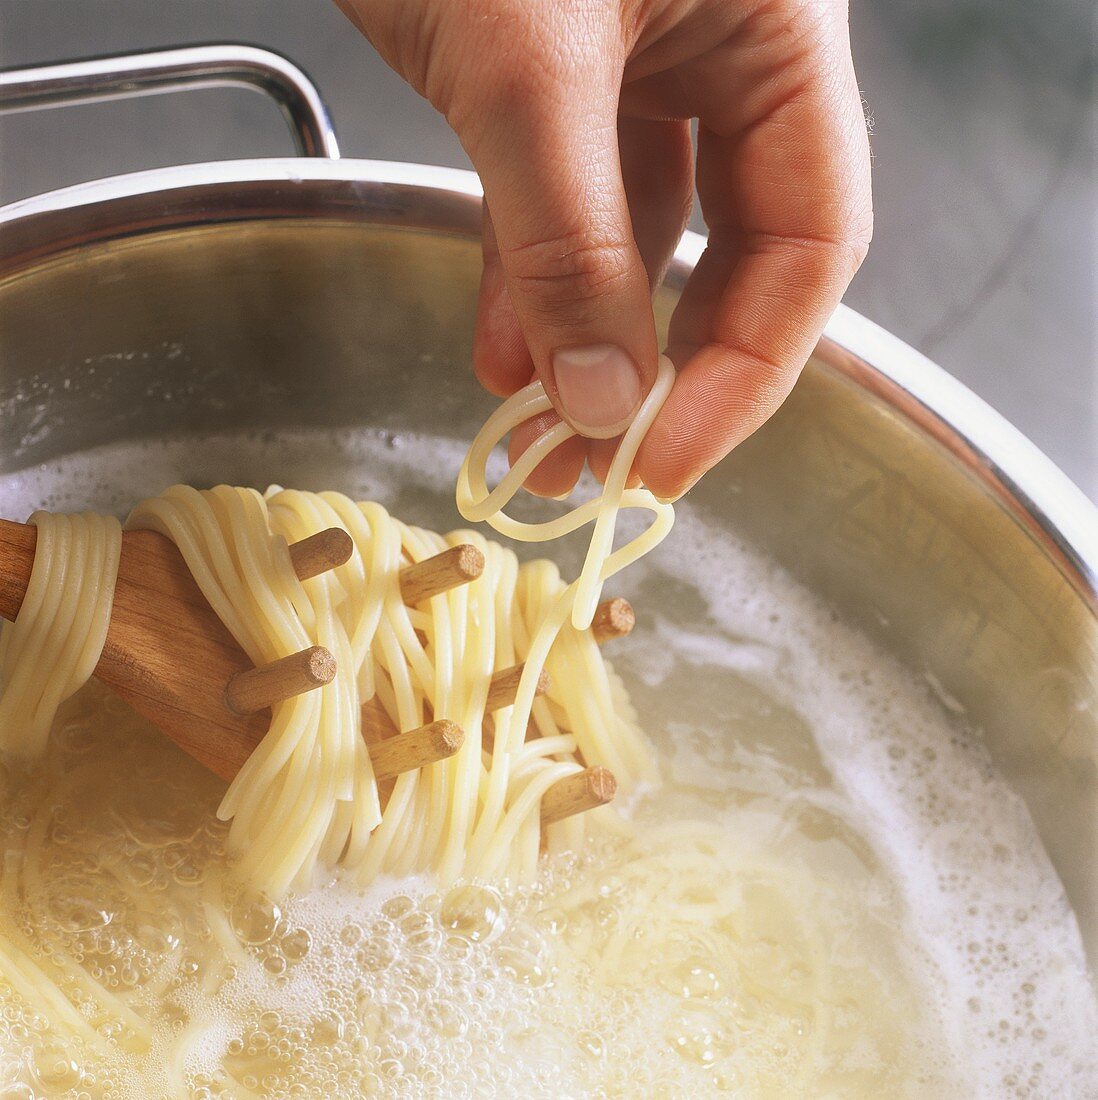 Cooking spaghetti: hand taking a piece from wooden spoon